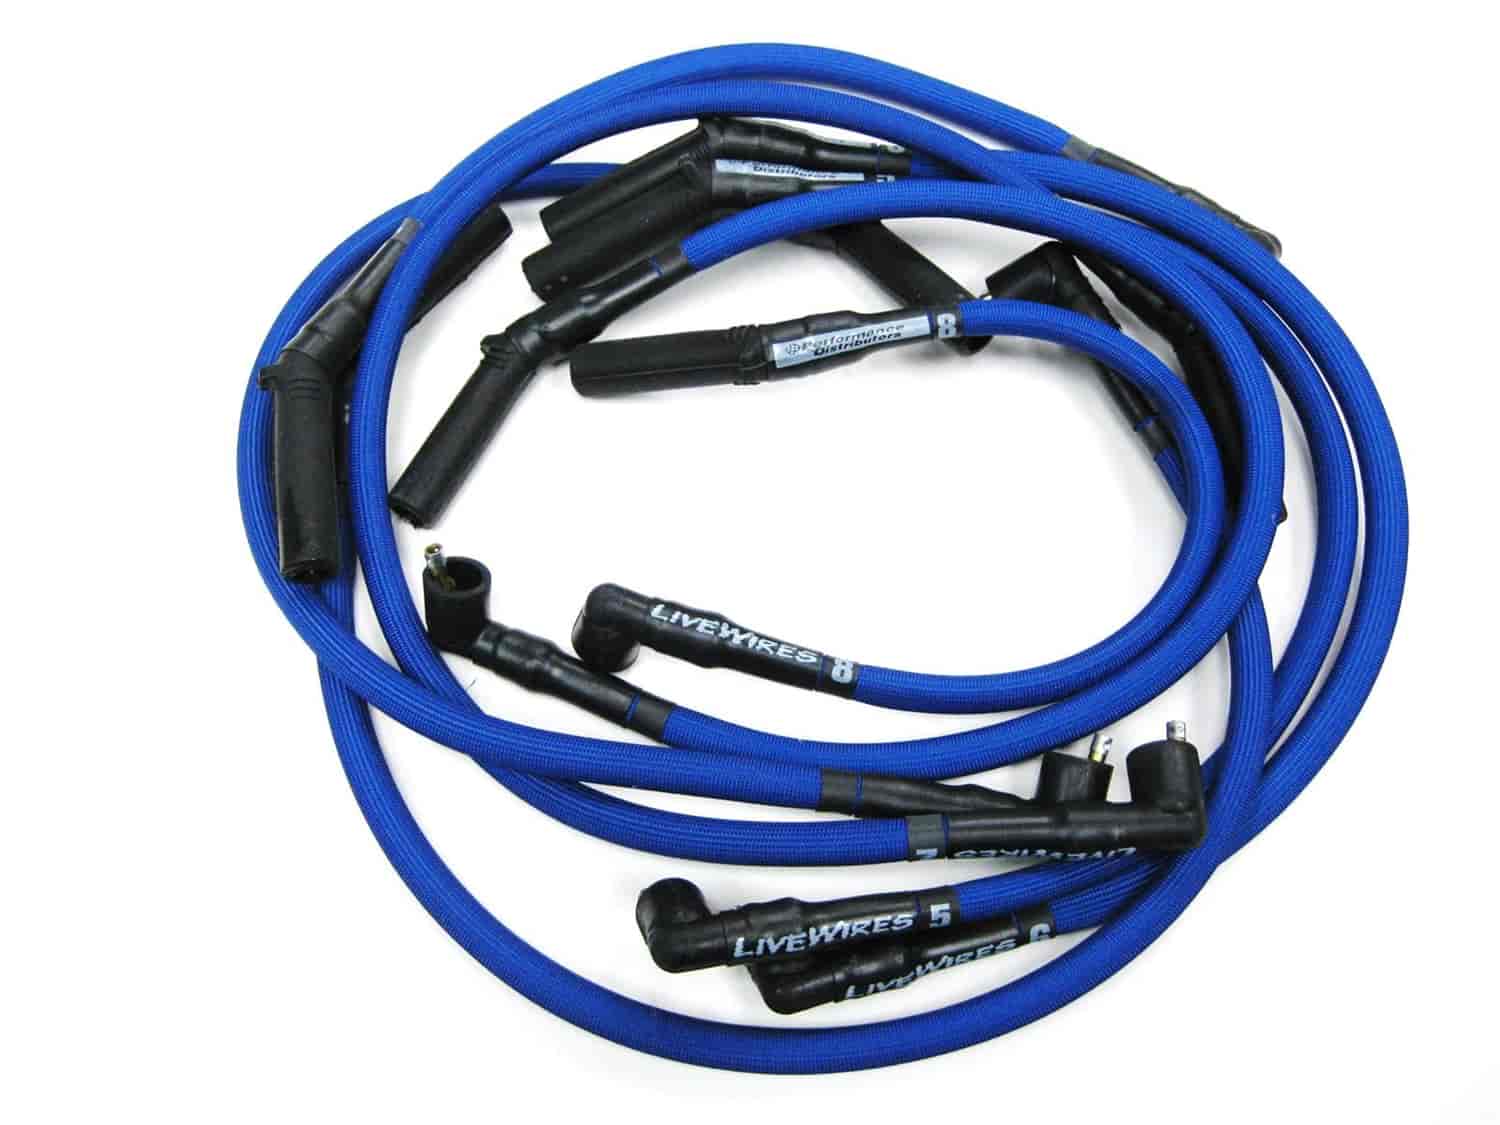 Plug Wires- HEI Term -Purple-1996-?98 4.0L & 4.6L Range Rover and 4.0L Discovery